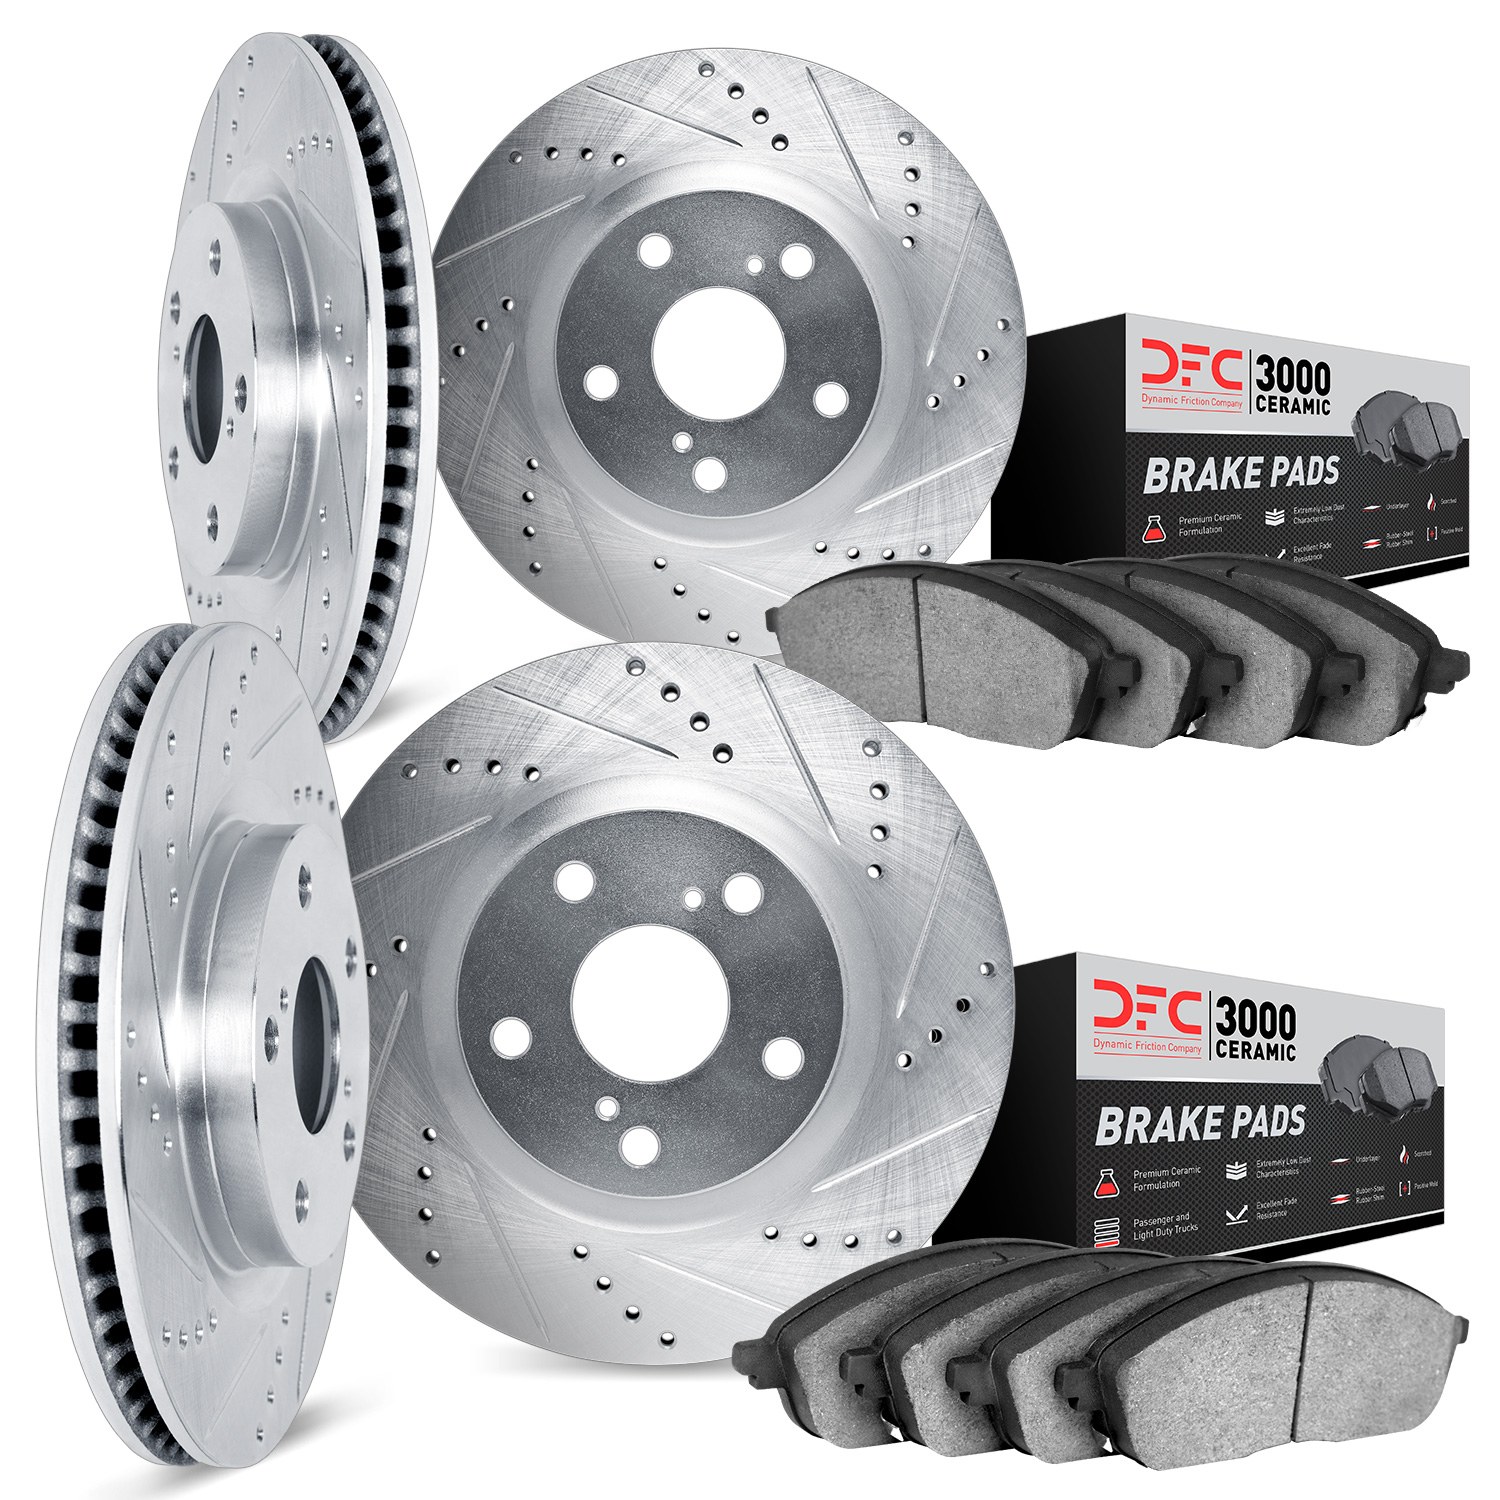 7304-54089 Drilled/Slotted Brake Rotor with 3000-Series Ceramic Brake Pads Kit [Silver], 2005-2014 Ford/Lincoln/Mercury/Mazda, P